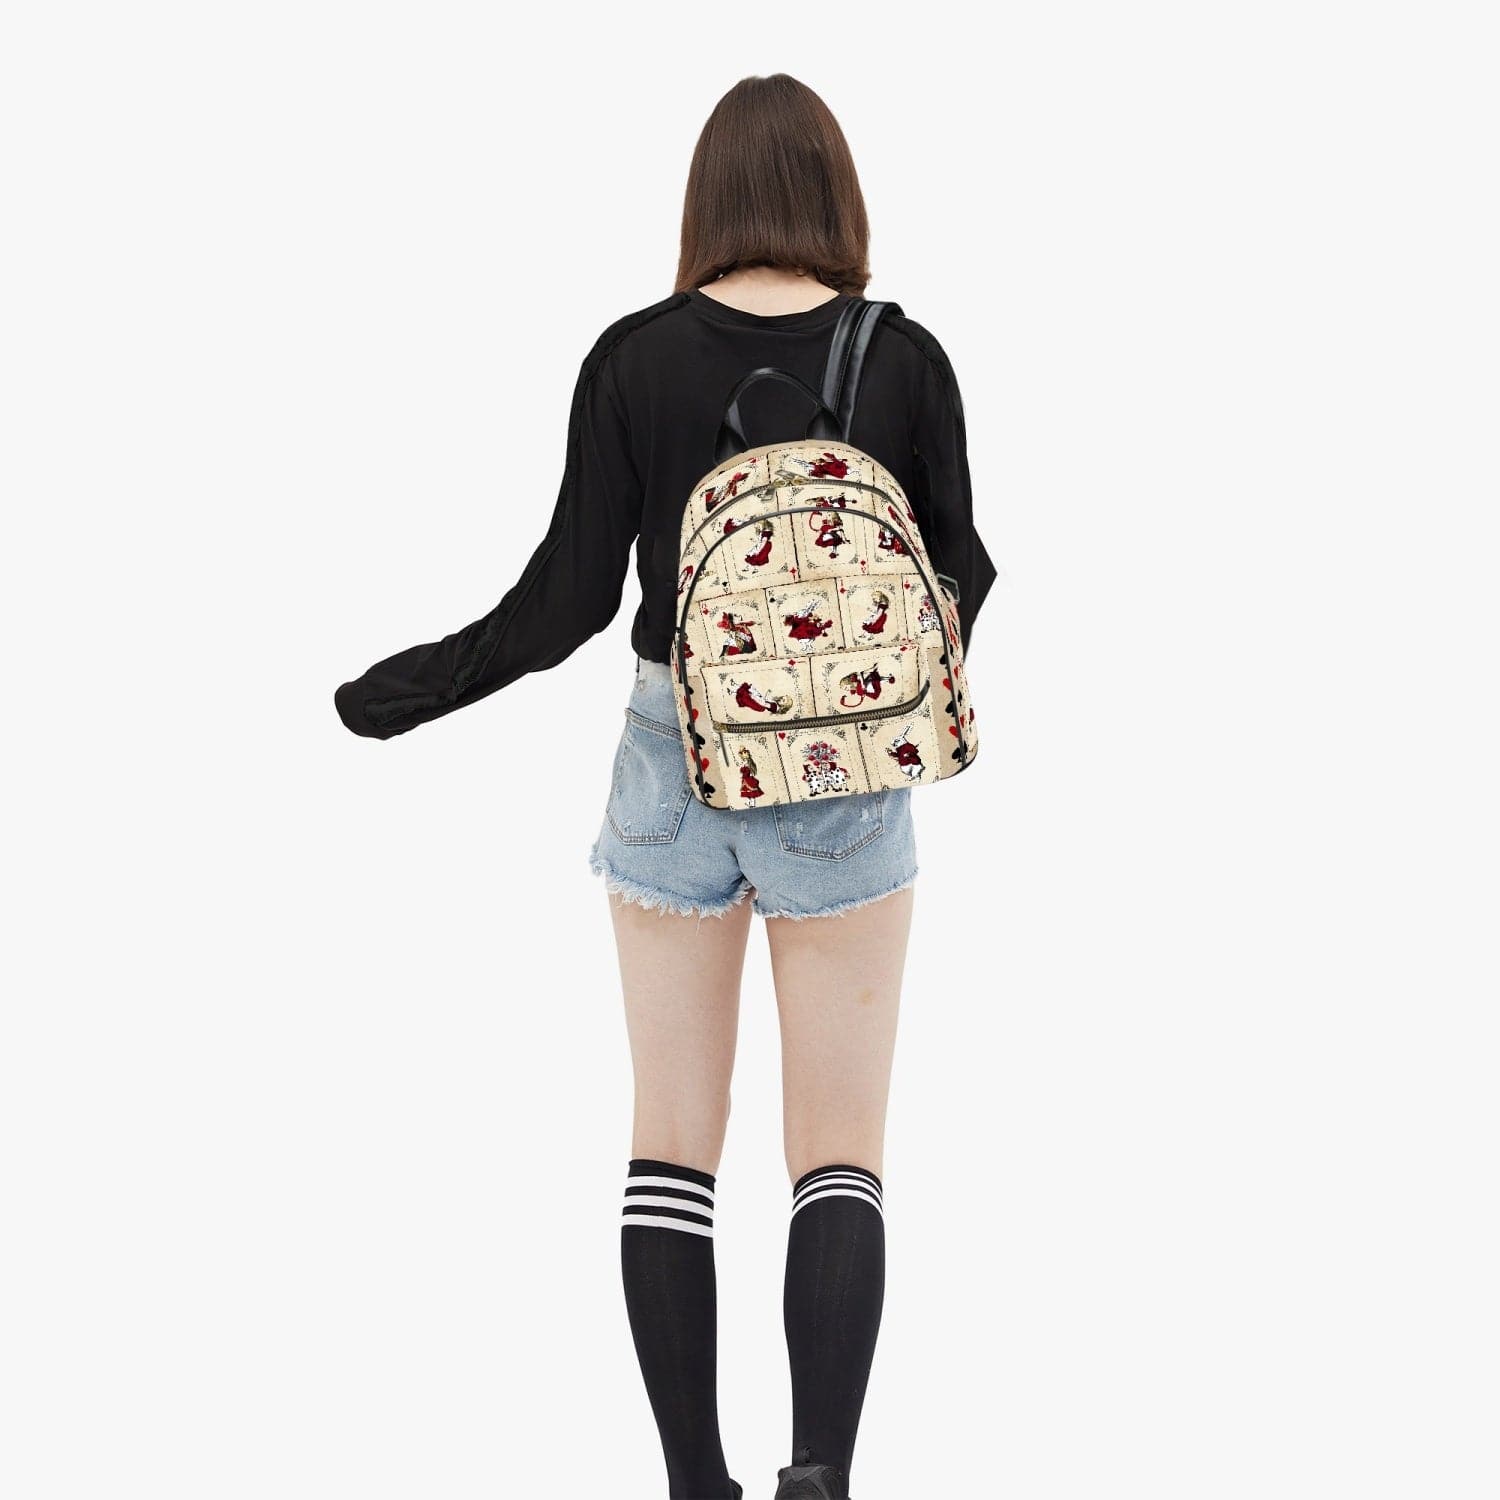 uni student carrying the Vintage retro red white and cream Alice in Wonderland playing cards print small backpack at Gallery Serpentine by the shoulder straps